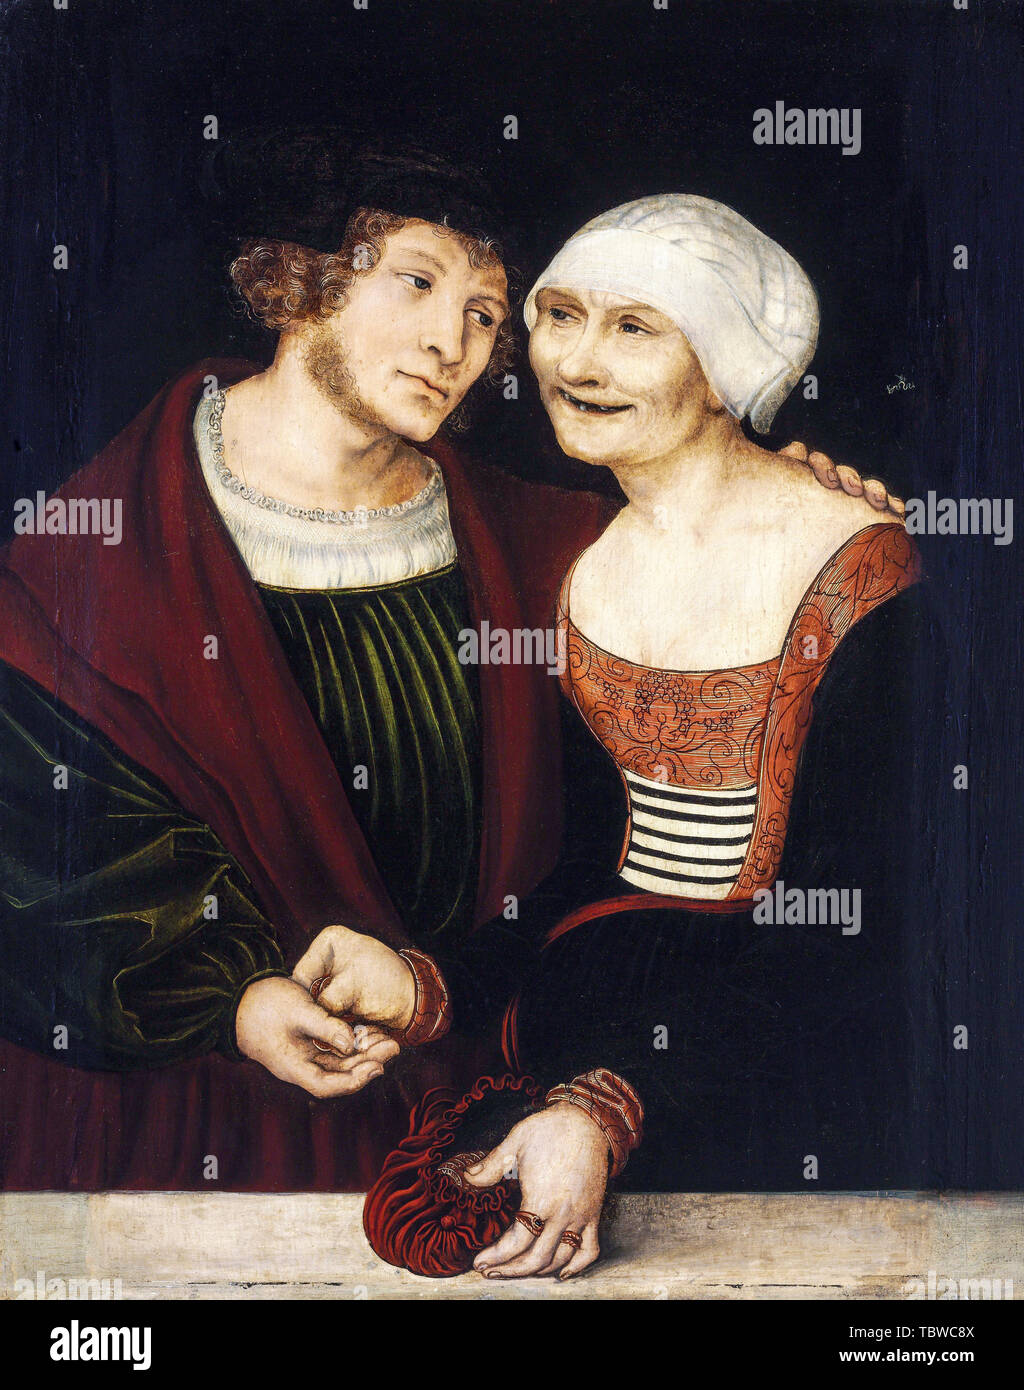 Lucas Cranach the Elder, Ill-Matched Couple, Young Man and Old Woman, portrait painting, circa 1520 Stock Photo